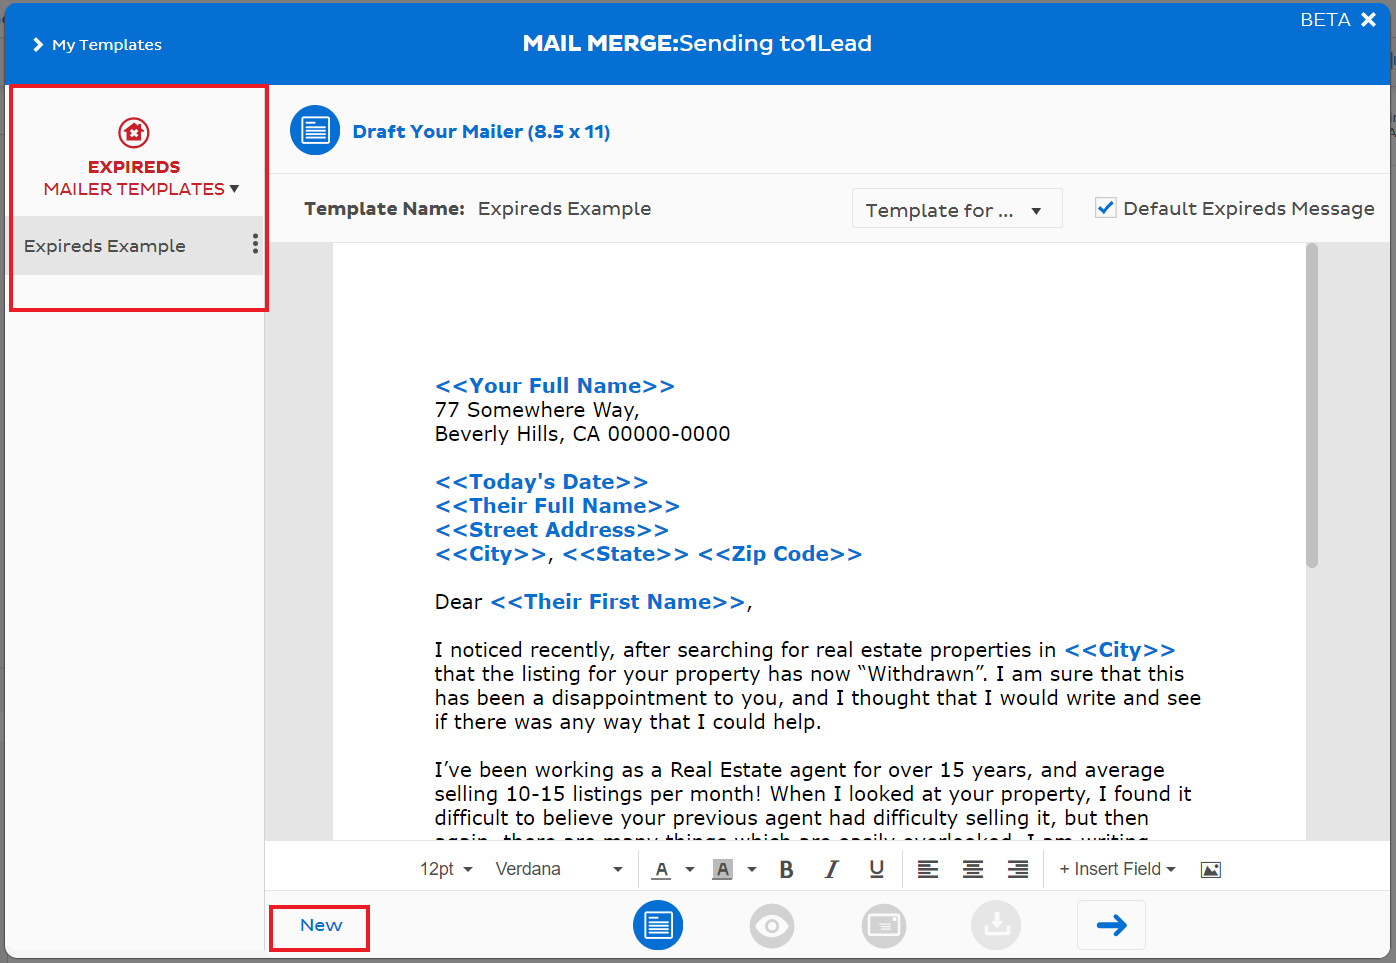 Mail Merge feature showing a sample mailer template.